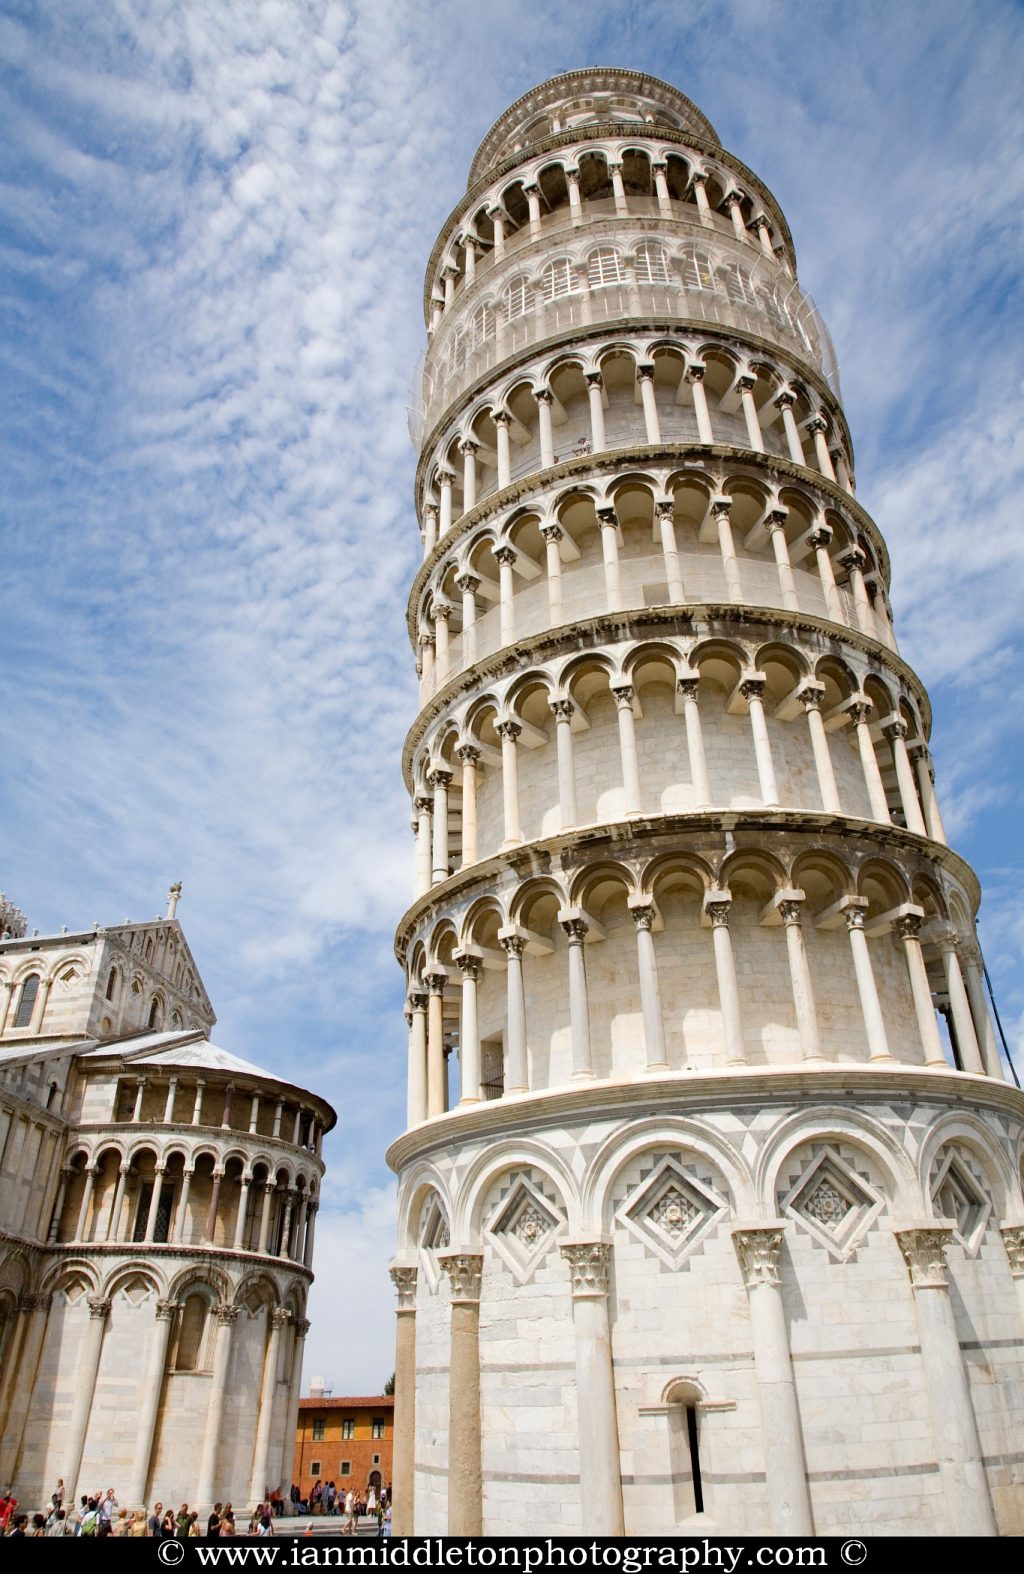 Leaning tower and Duomo in Campo di Miracoli (field of Miracles), Pisa, Tuscany, Italy